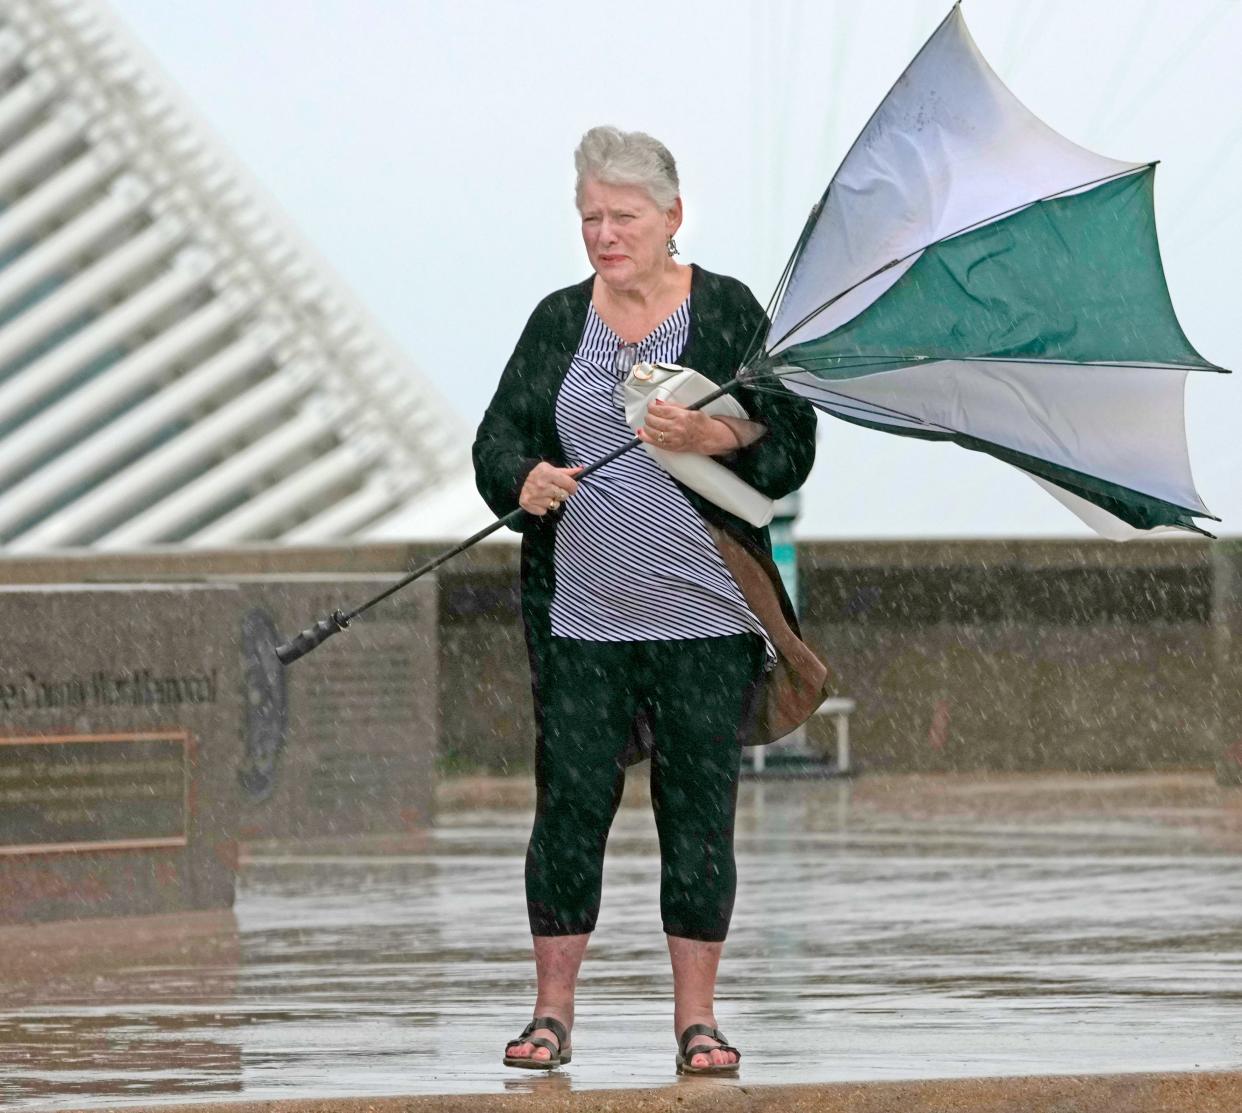 A woman, Pat, who only wanted to use her first name, from Florida,  fights to keep her umbrella open in the wind and rain while waiting for her ride to pick her up in front of the Milwaukee County War Memorial Center on North Lincoln Memorial Drive in Milwaukee on Sunday, Sept. 11, 2022. Rain fell for most of the day Sunday with more expected Monday.